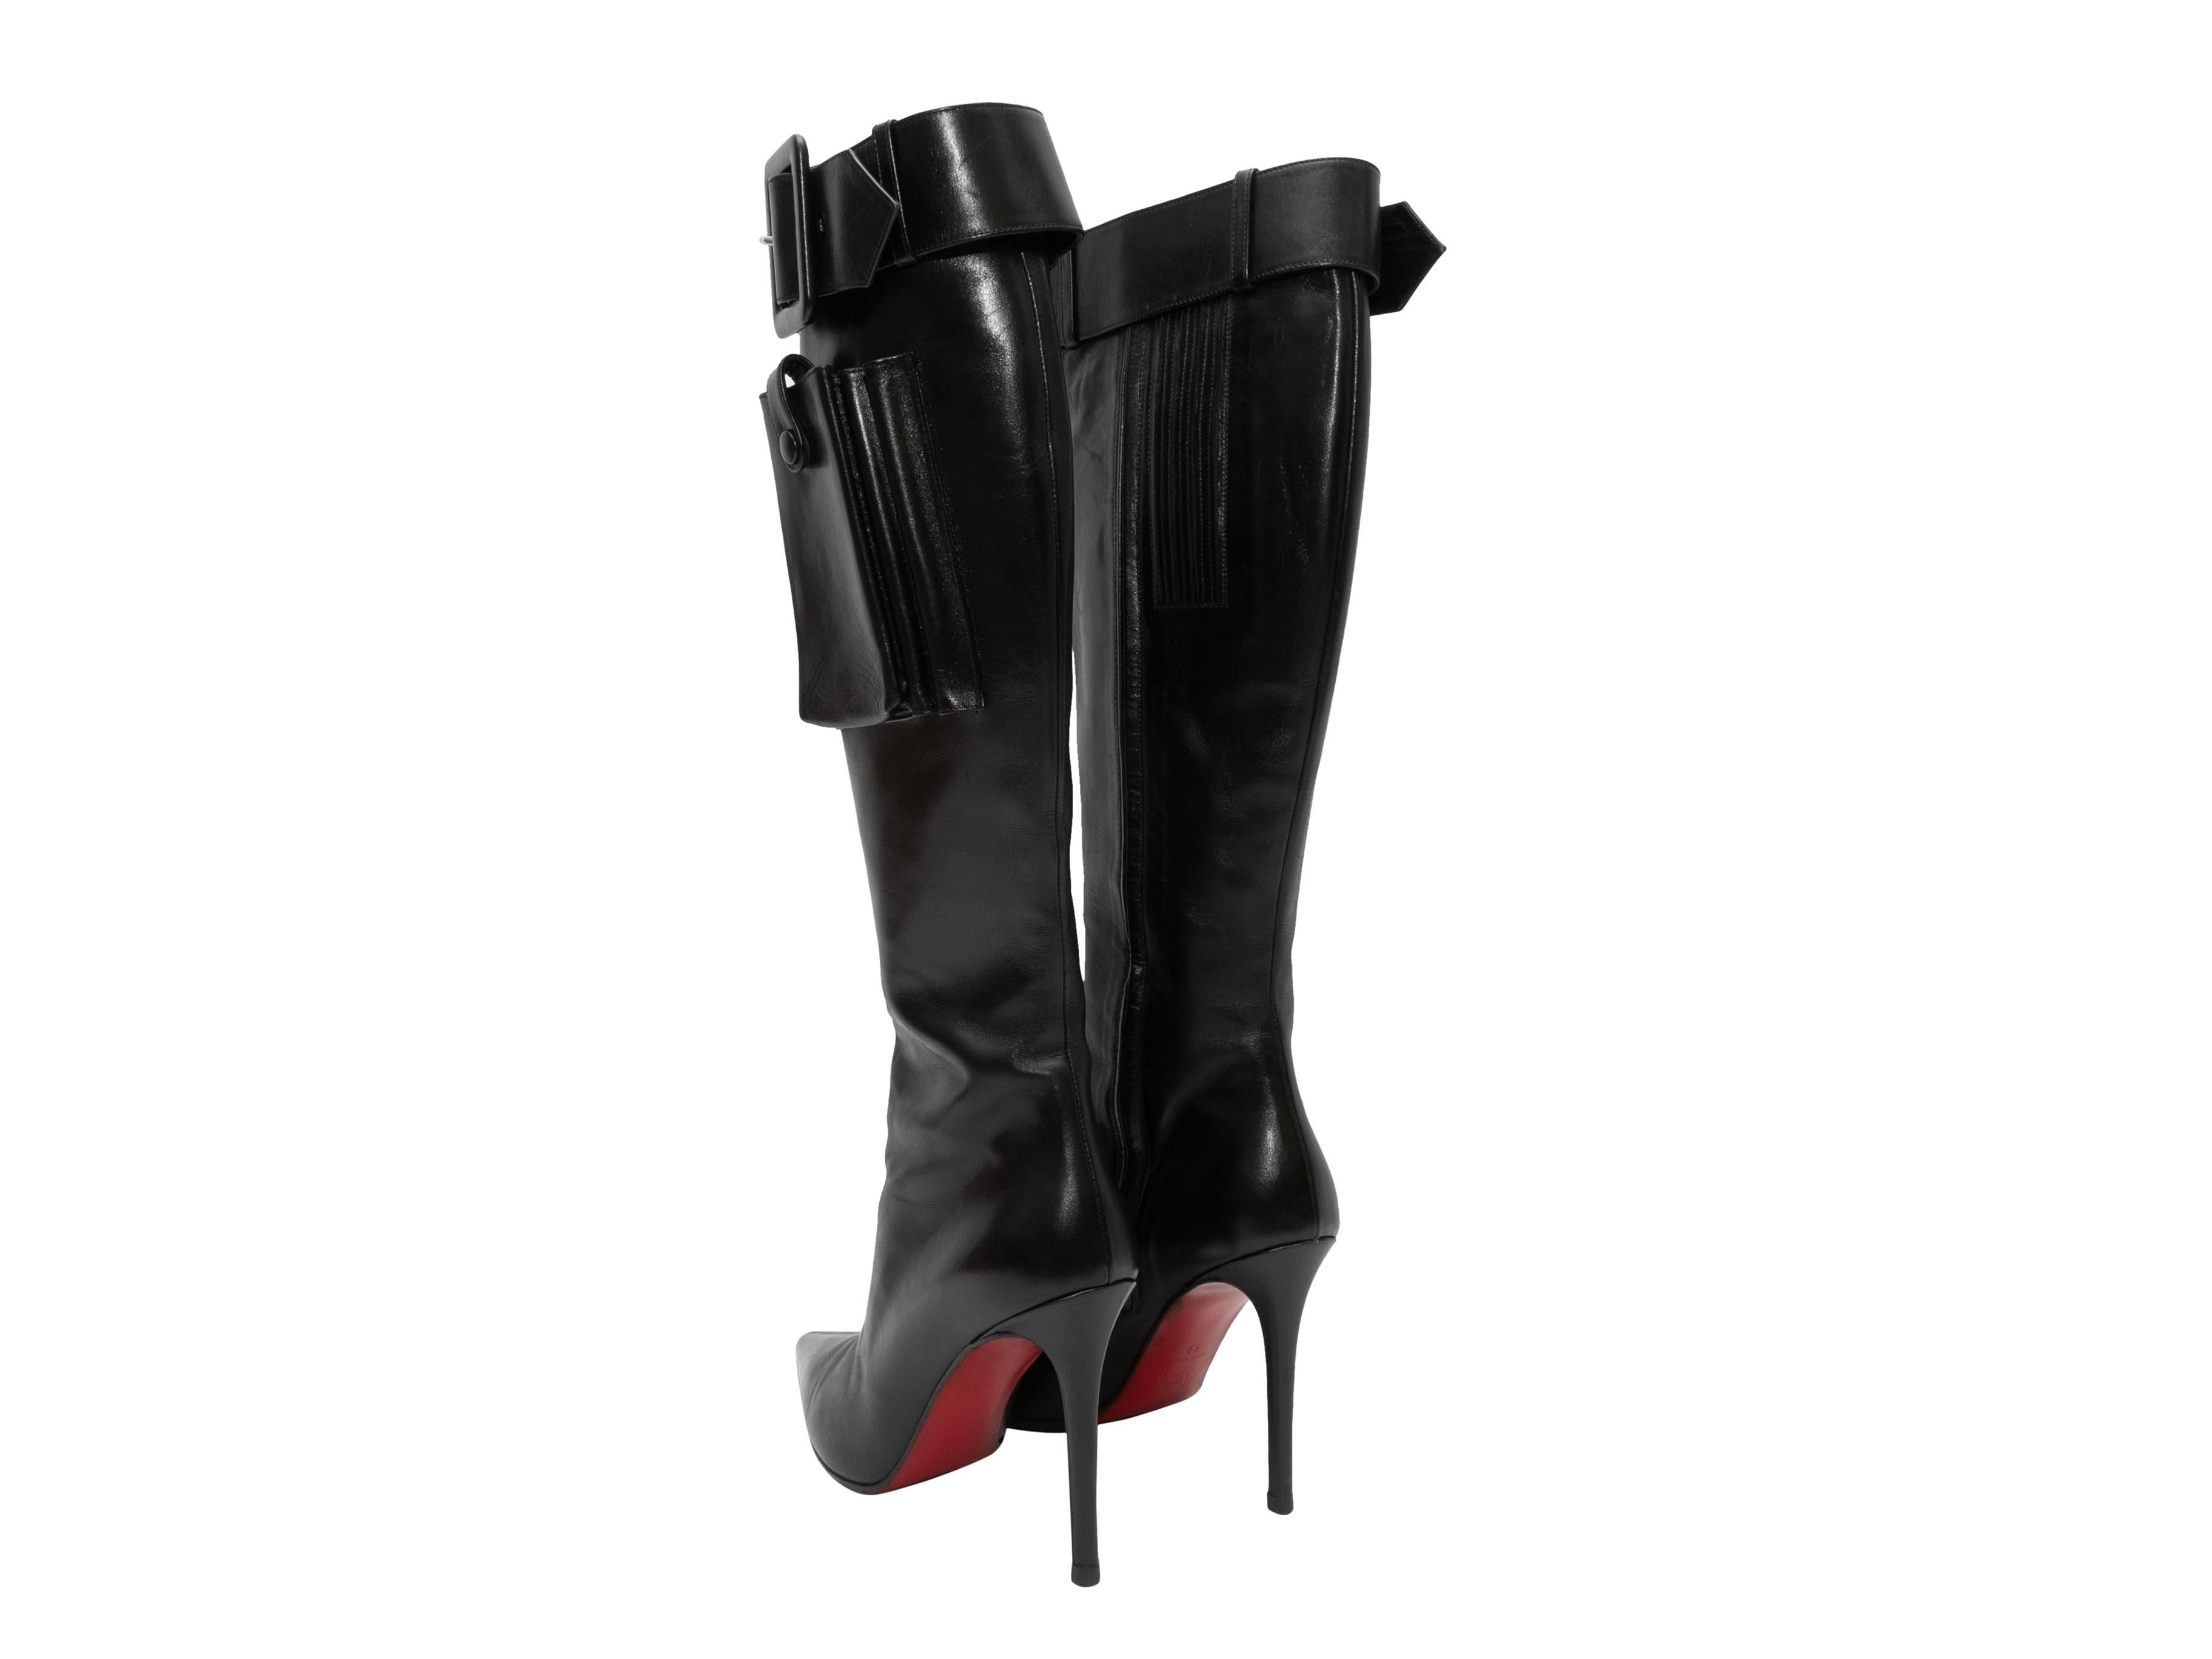 Black leather knee-high pointed-toe cargo pocket boots by Christian Louboutin. Buckle accents at tops. 15